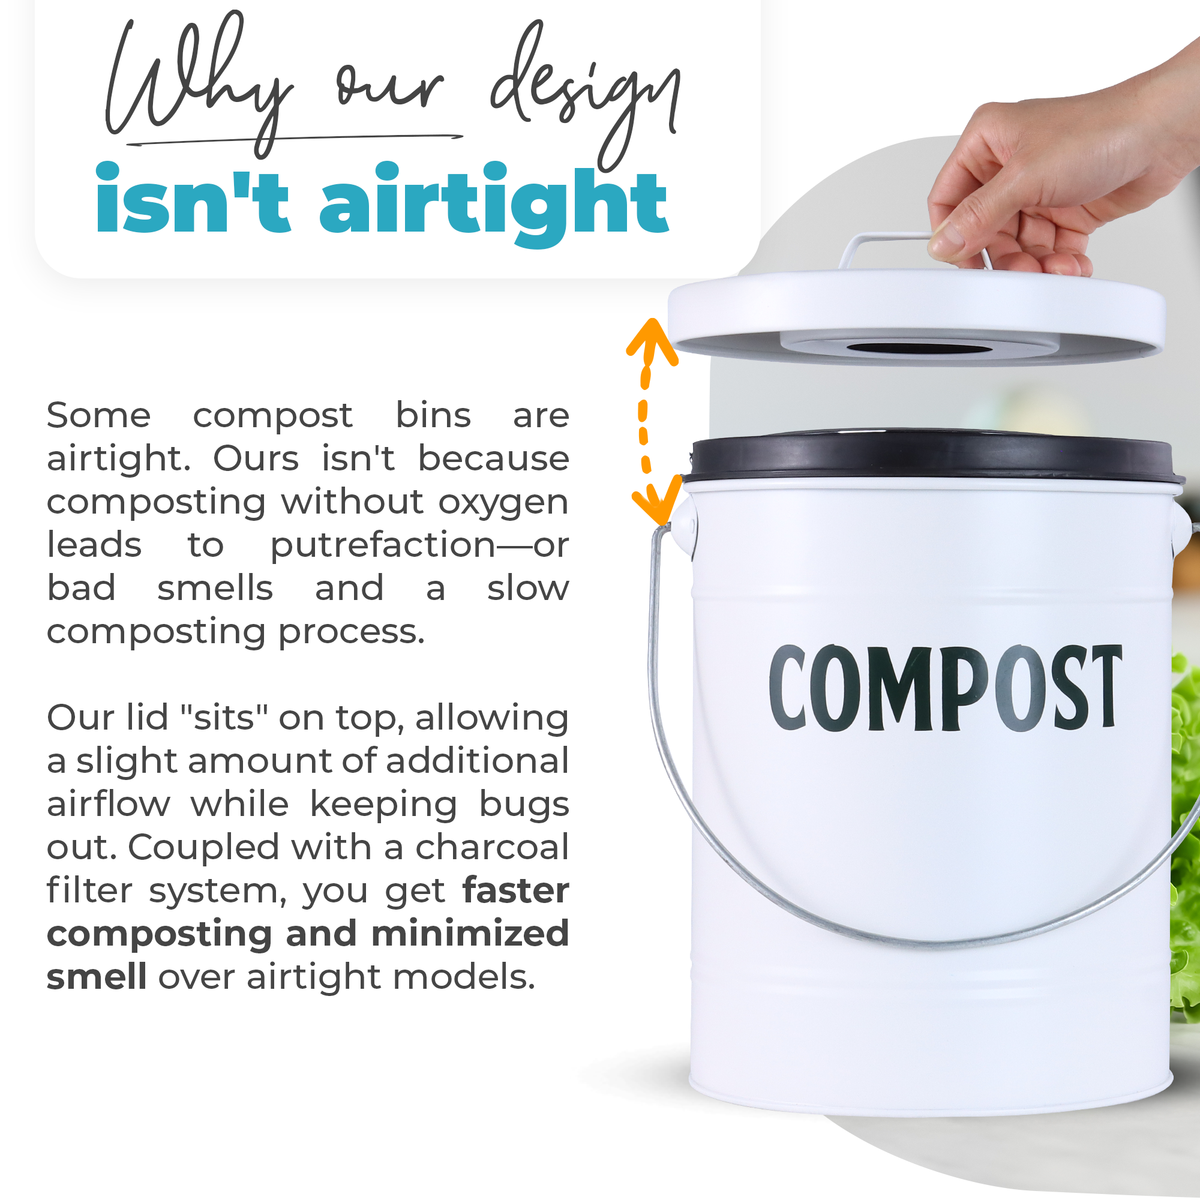 Indoor Compost Bin No Smell, Compost Pail for Kitchen Counter, 1.3 Gal -  Saratoga Home